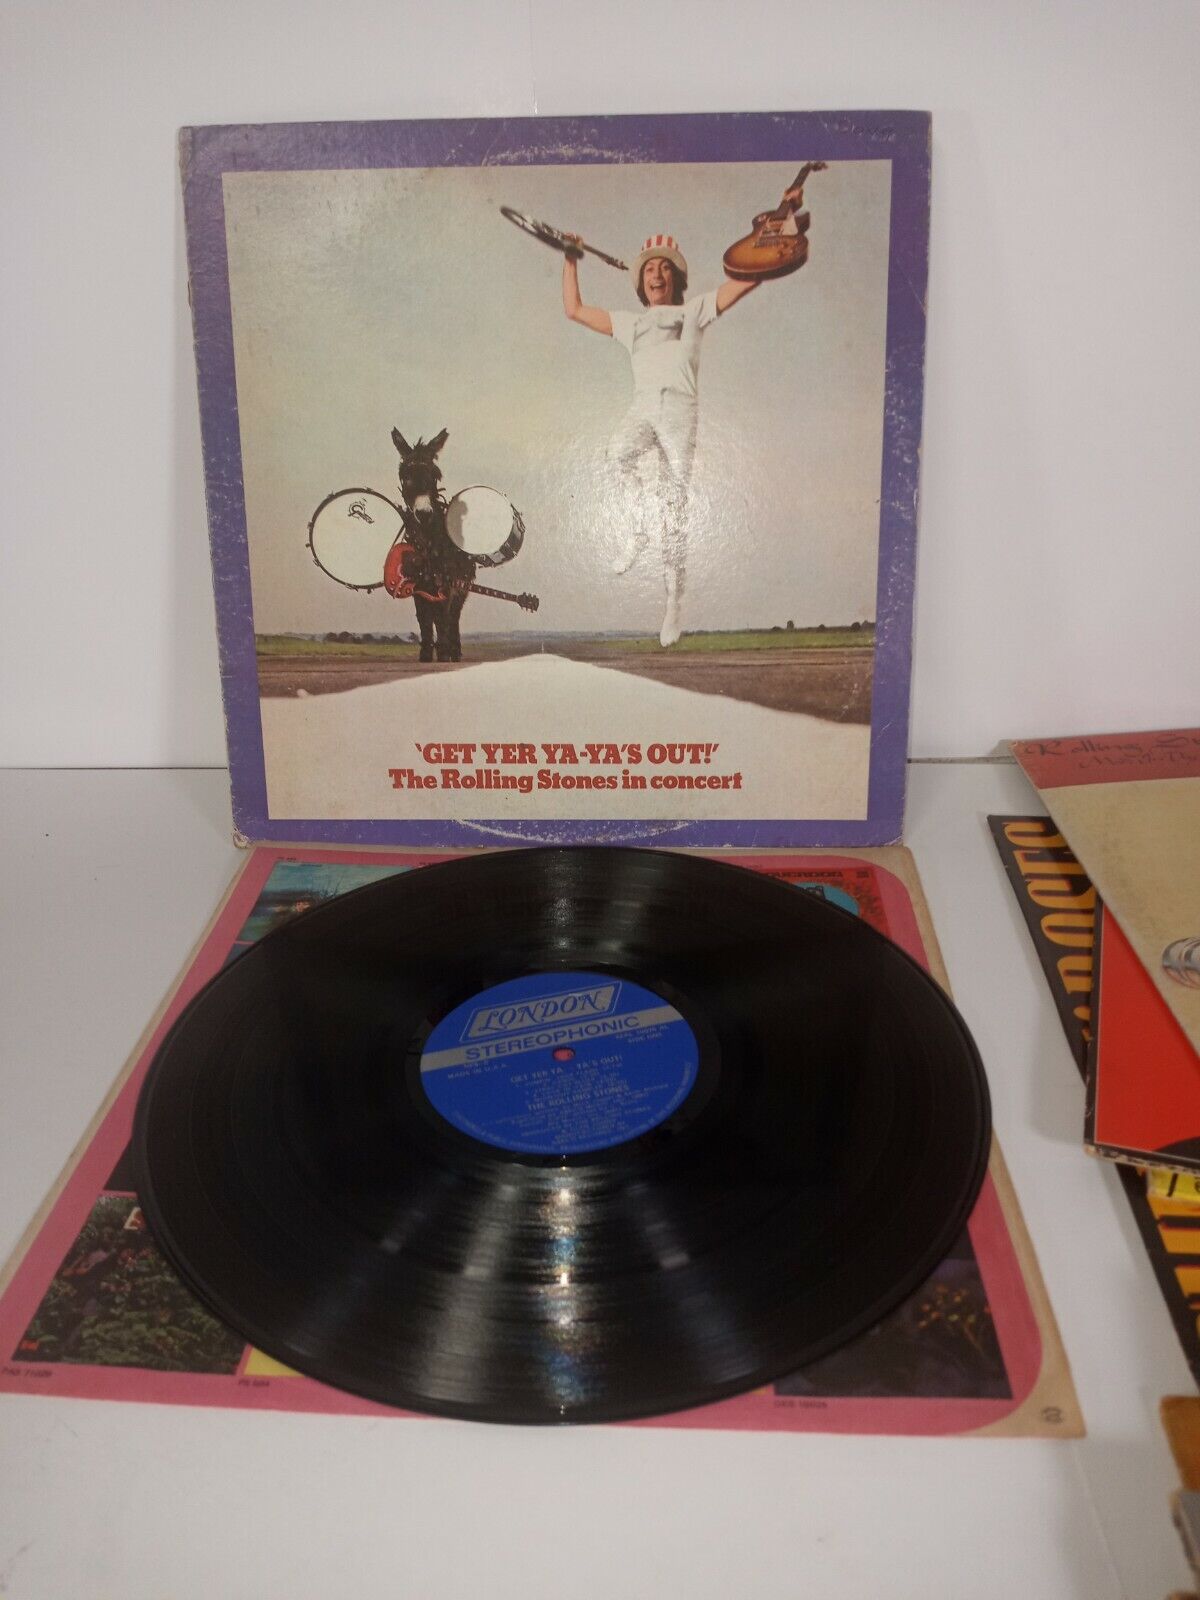 The Rolling Stones ‎– Get Yer Ya-Ya's Out! (The Rolling Stones In Concert)  LP  